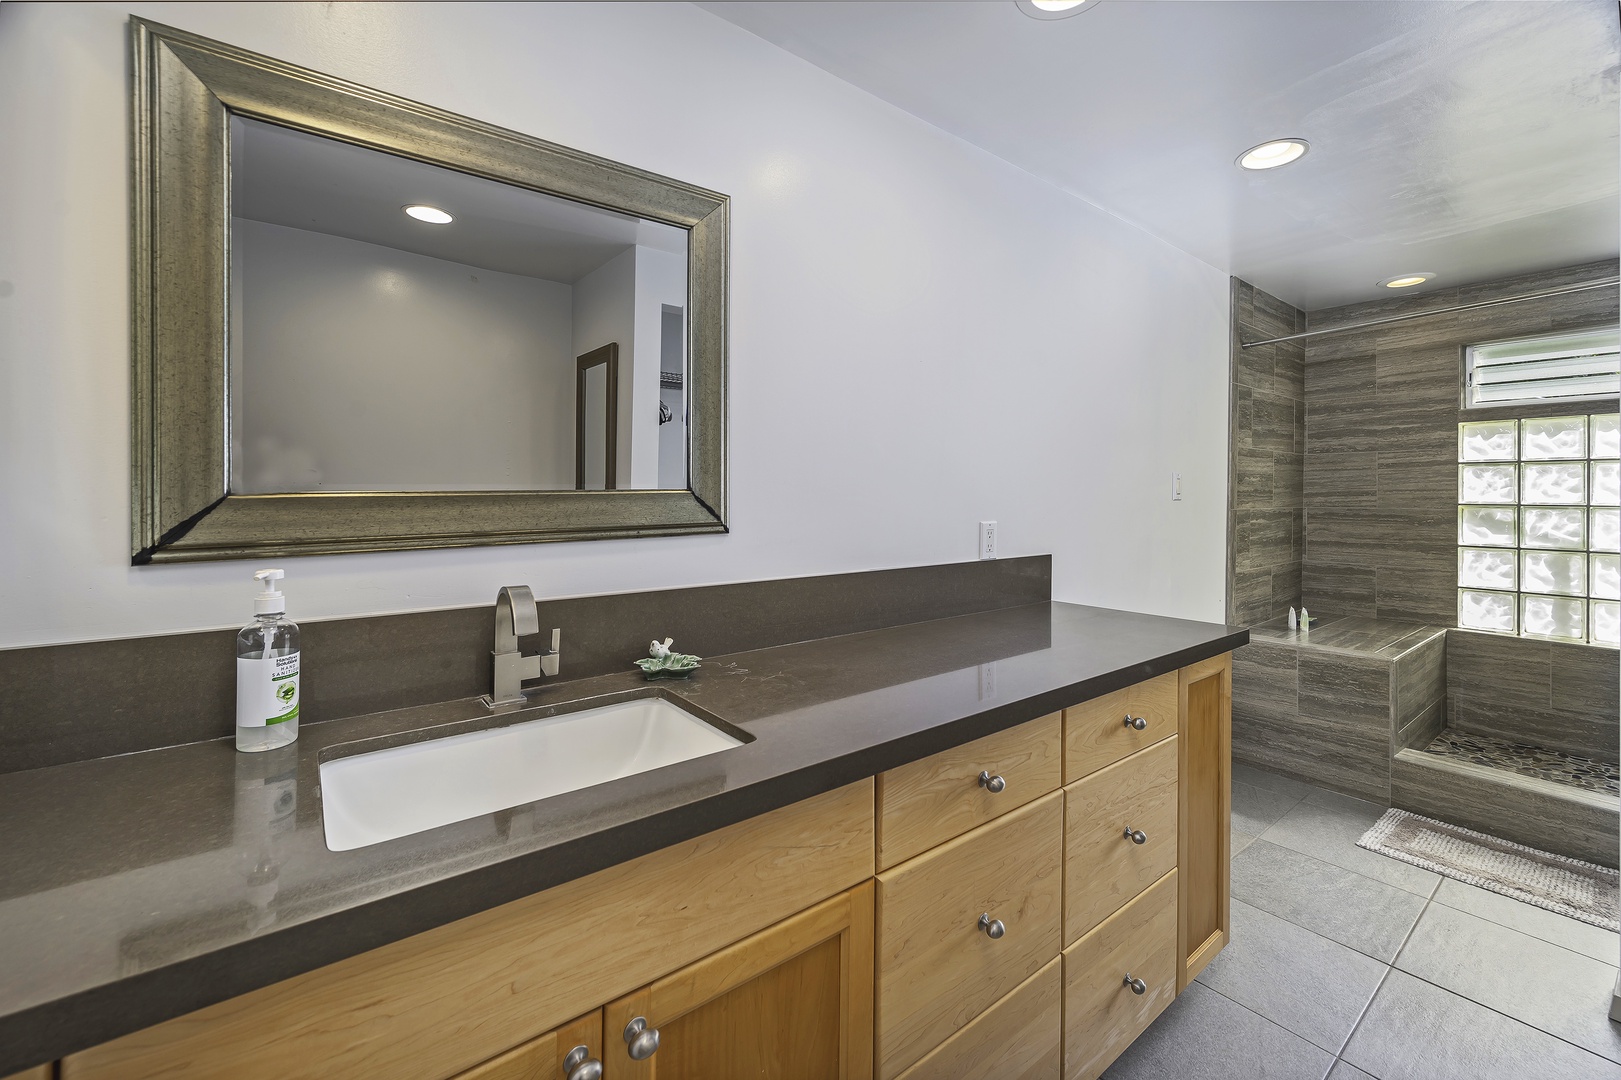 Honolulu Vacation Rentals, Hale Malia - The guest suite ensuite bath has a large vanity with lots of storage